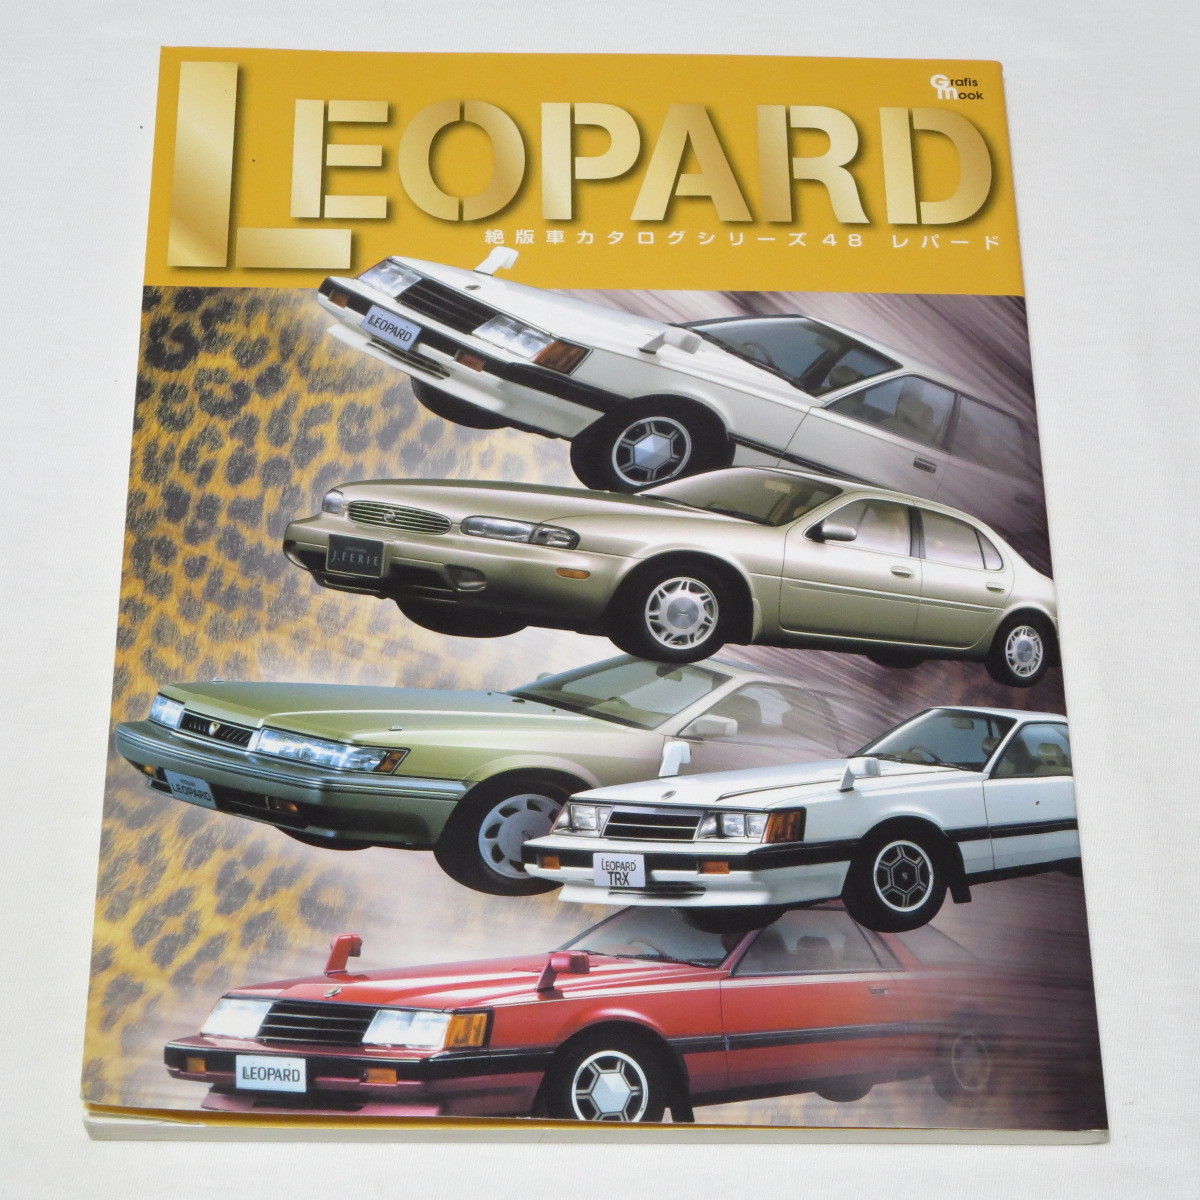  Nissan Leopard NISSAN LEOPPARD out of print car catalog series 48